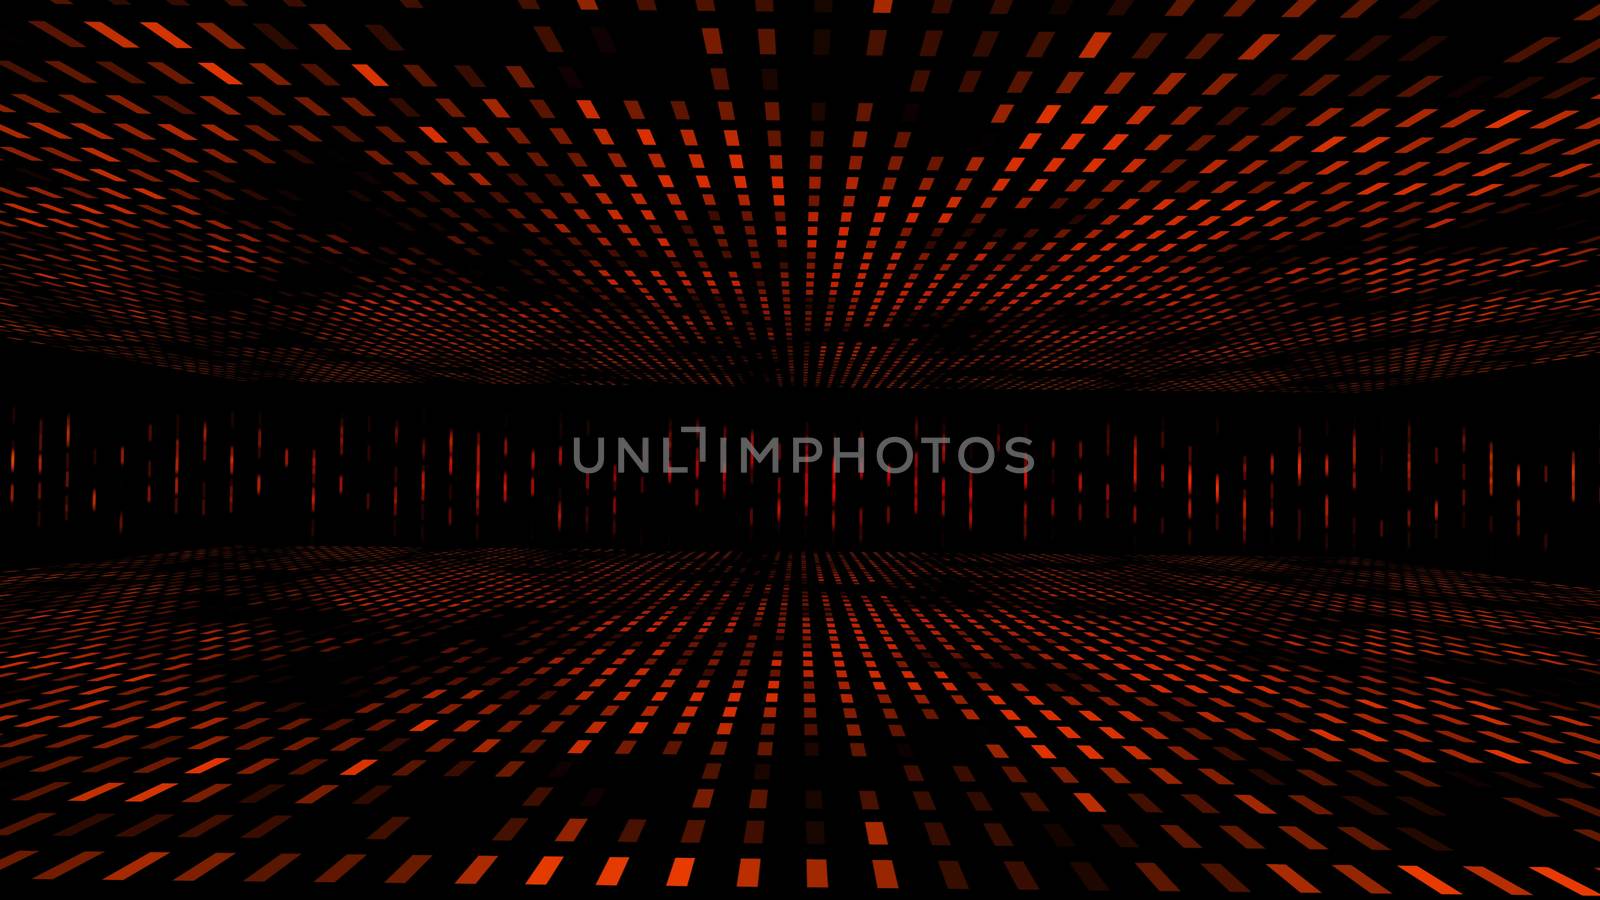 Arty 3d rendering of a hypnotic dotted black and red cubic tunnel having infinity perspective. It impresses with the graphic exactness of its lines.